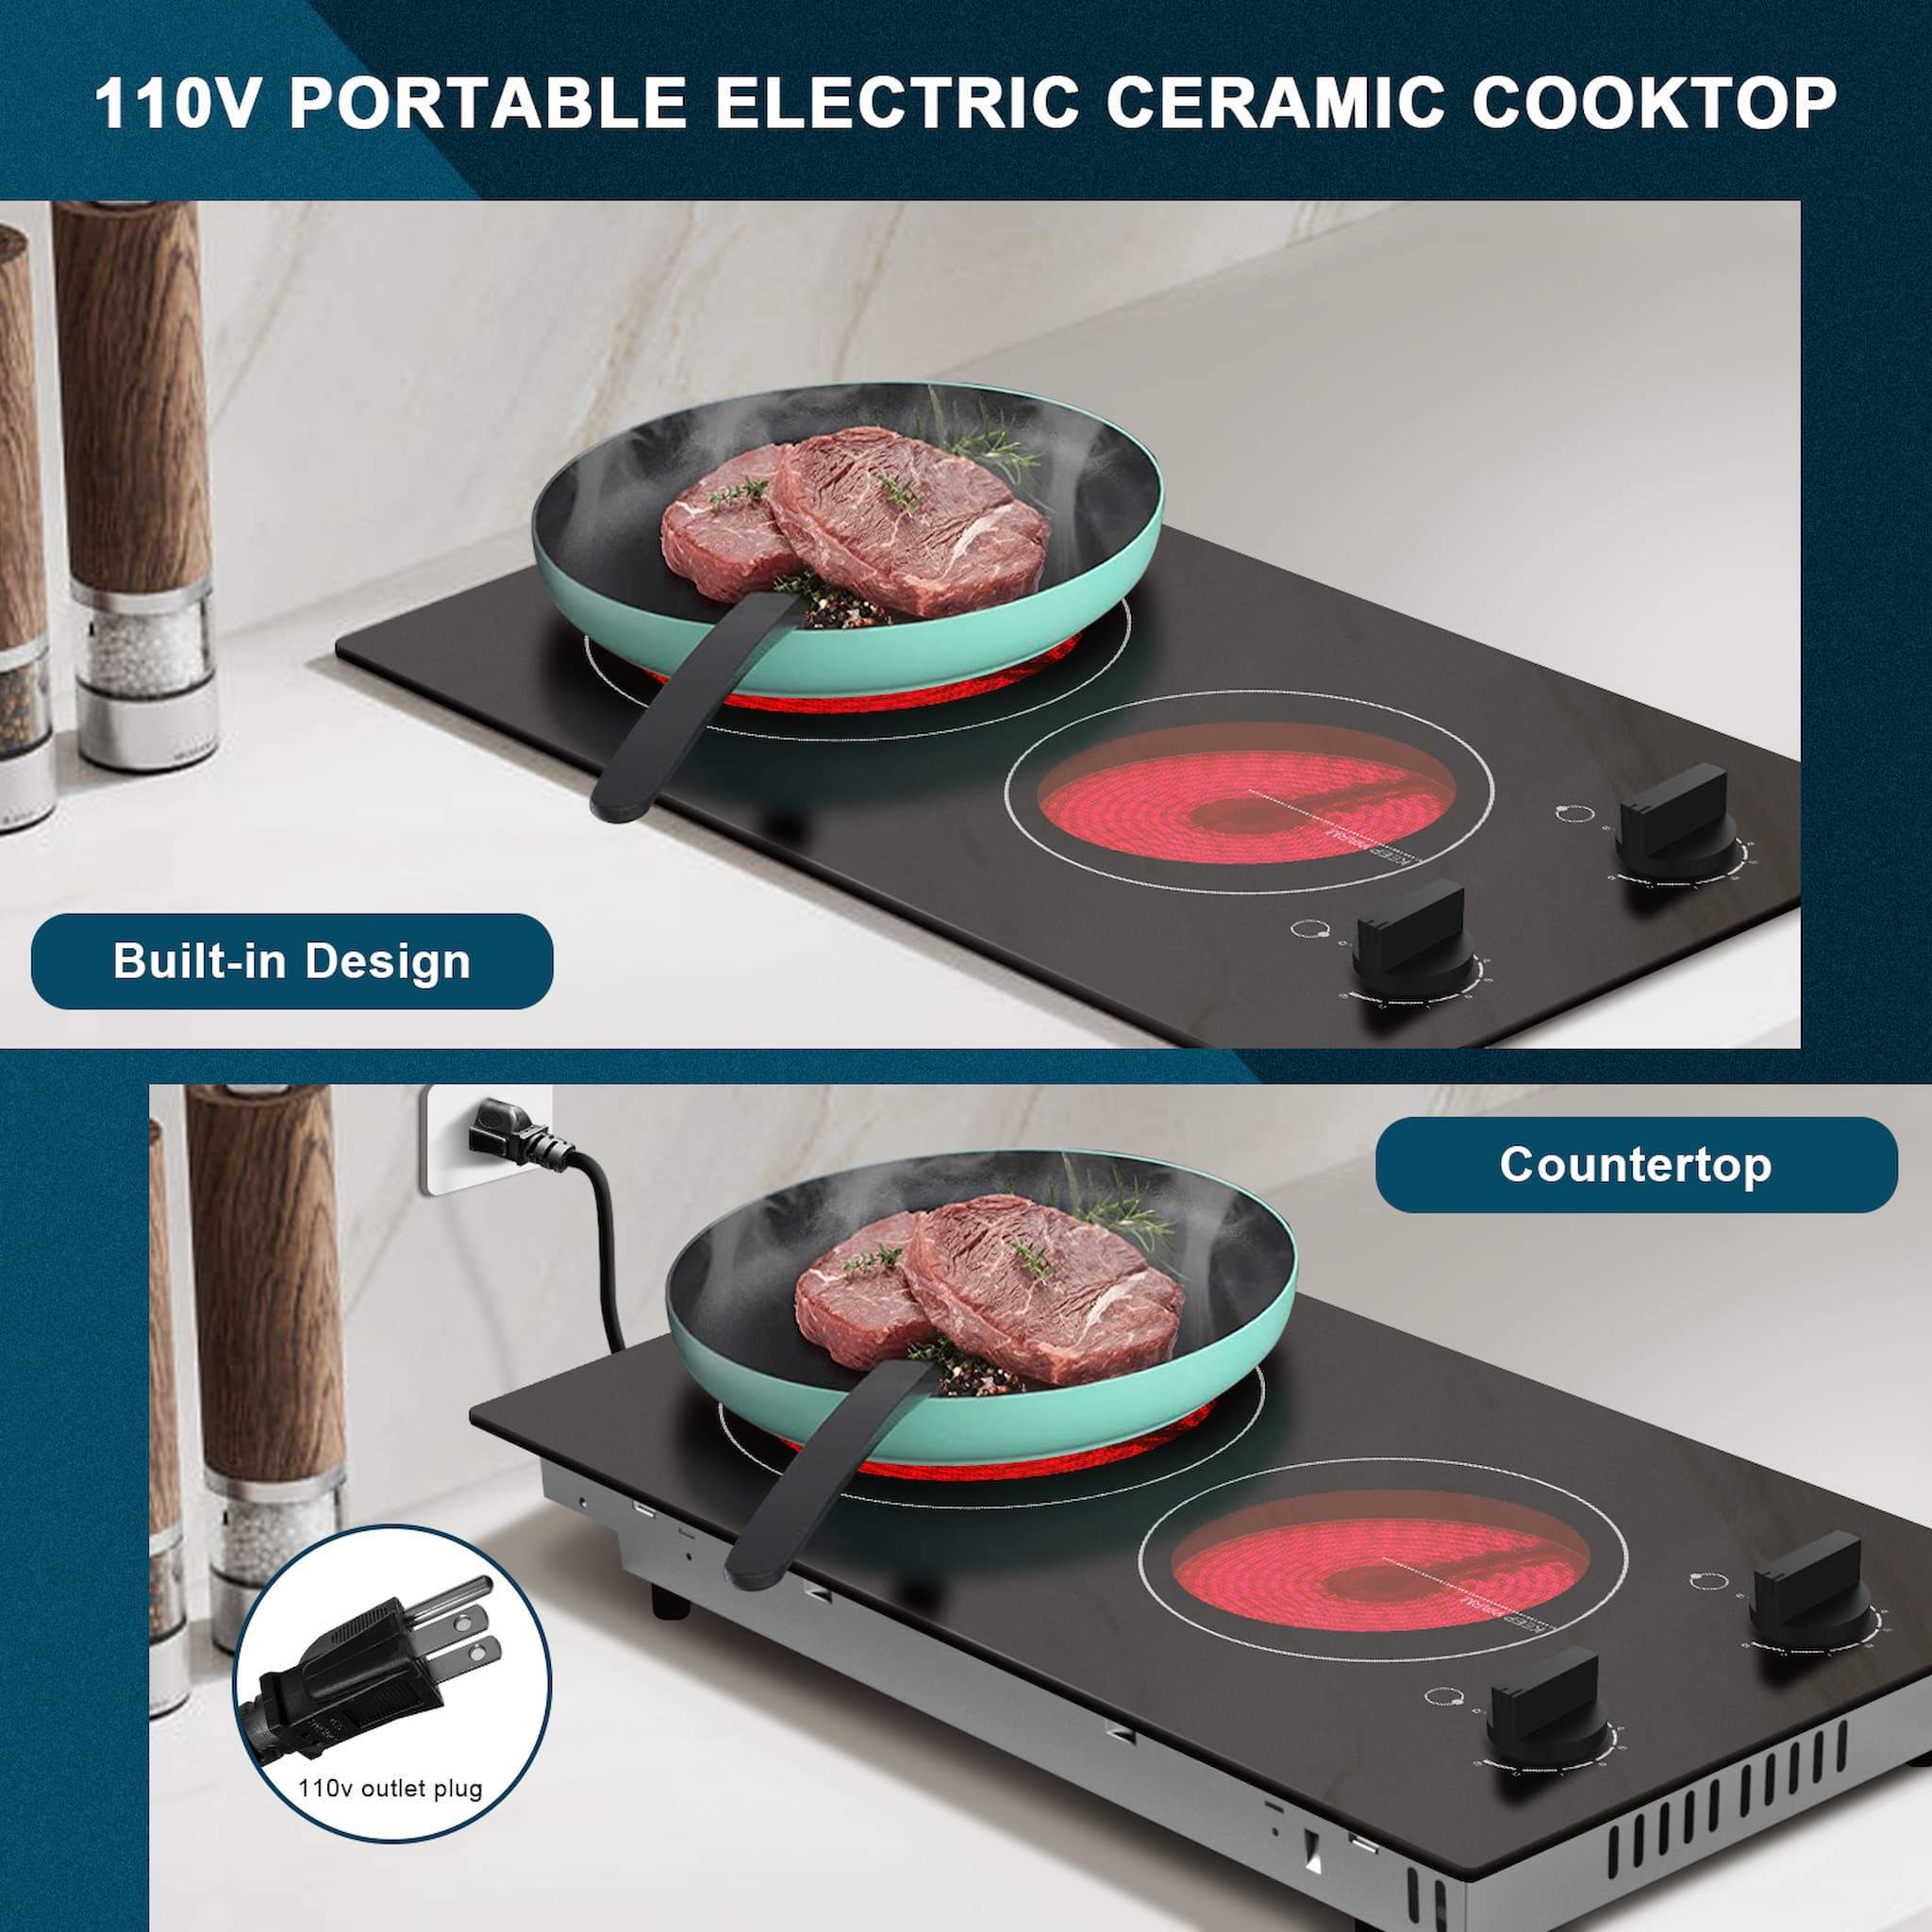 This 110v stove can be placed in two ways. If you don't want to be so troublesome, you can put the 12'' electric cooktop directly on the countertop